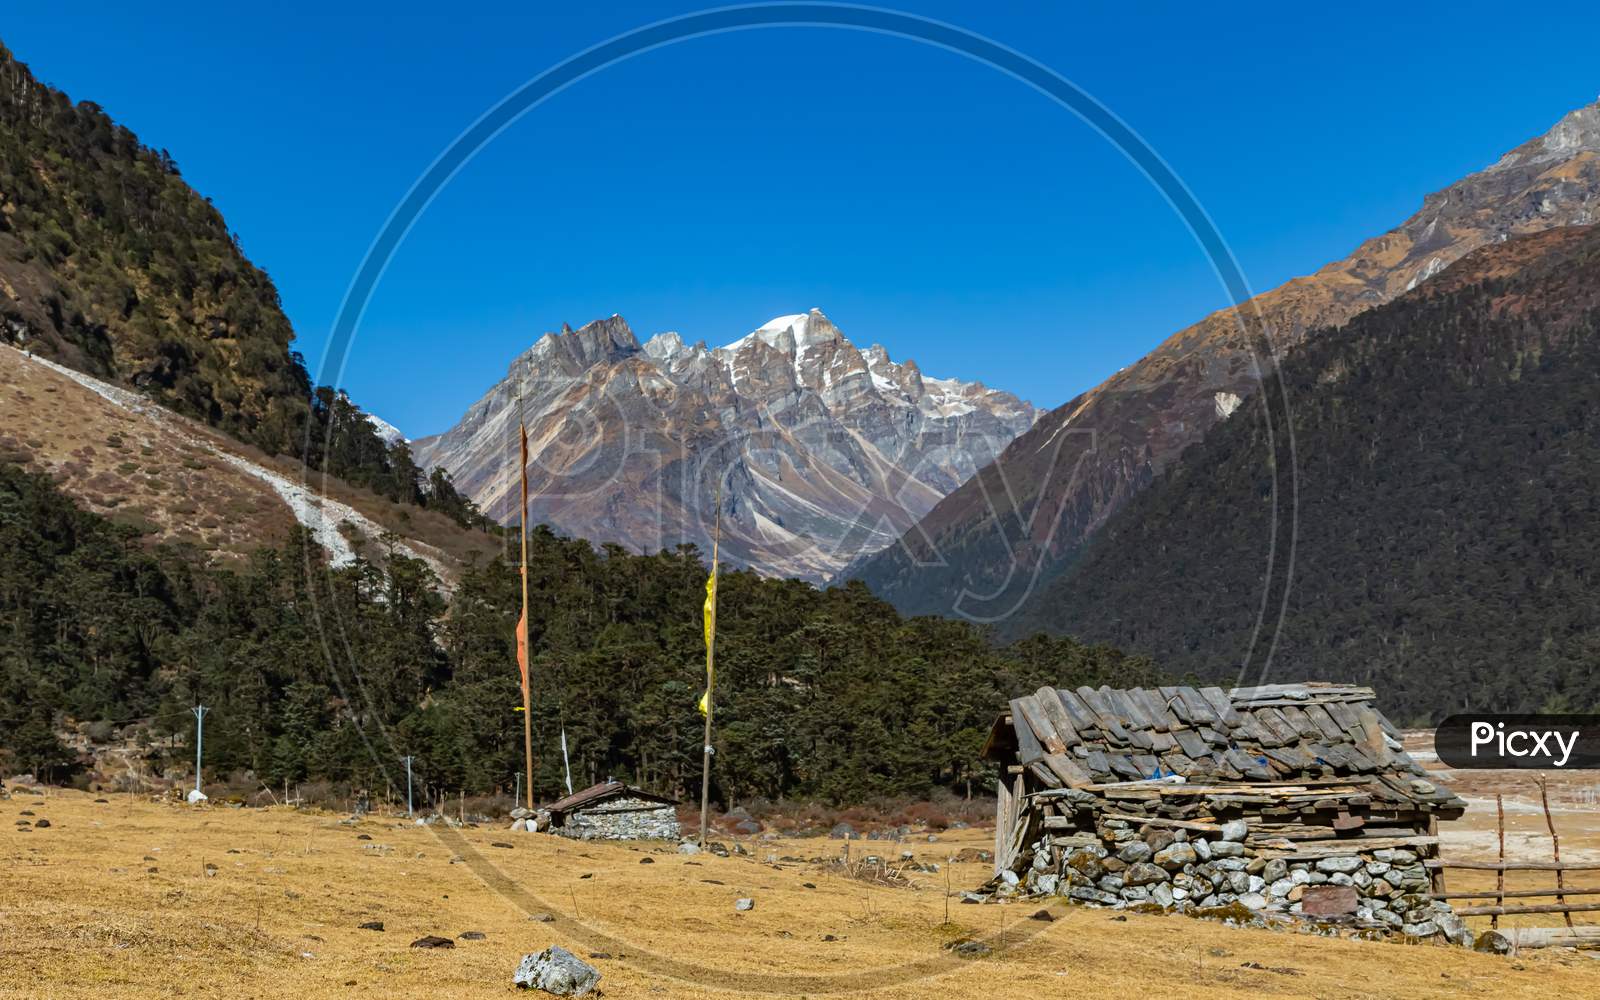 image of a hut made of stones with Tibetan prayer flags in front